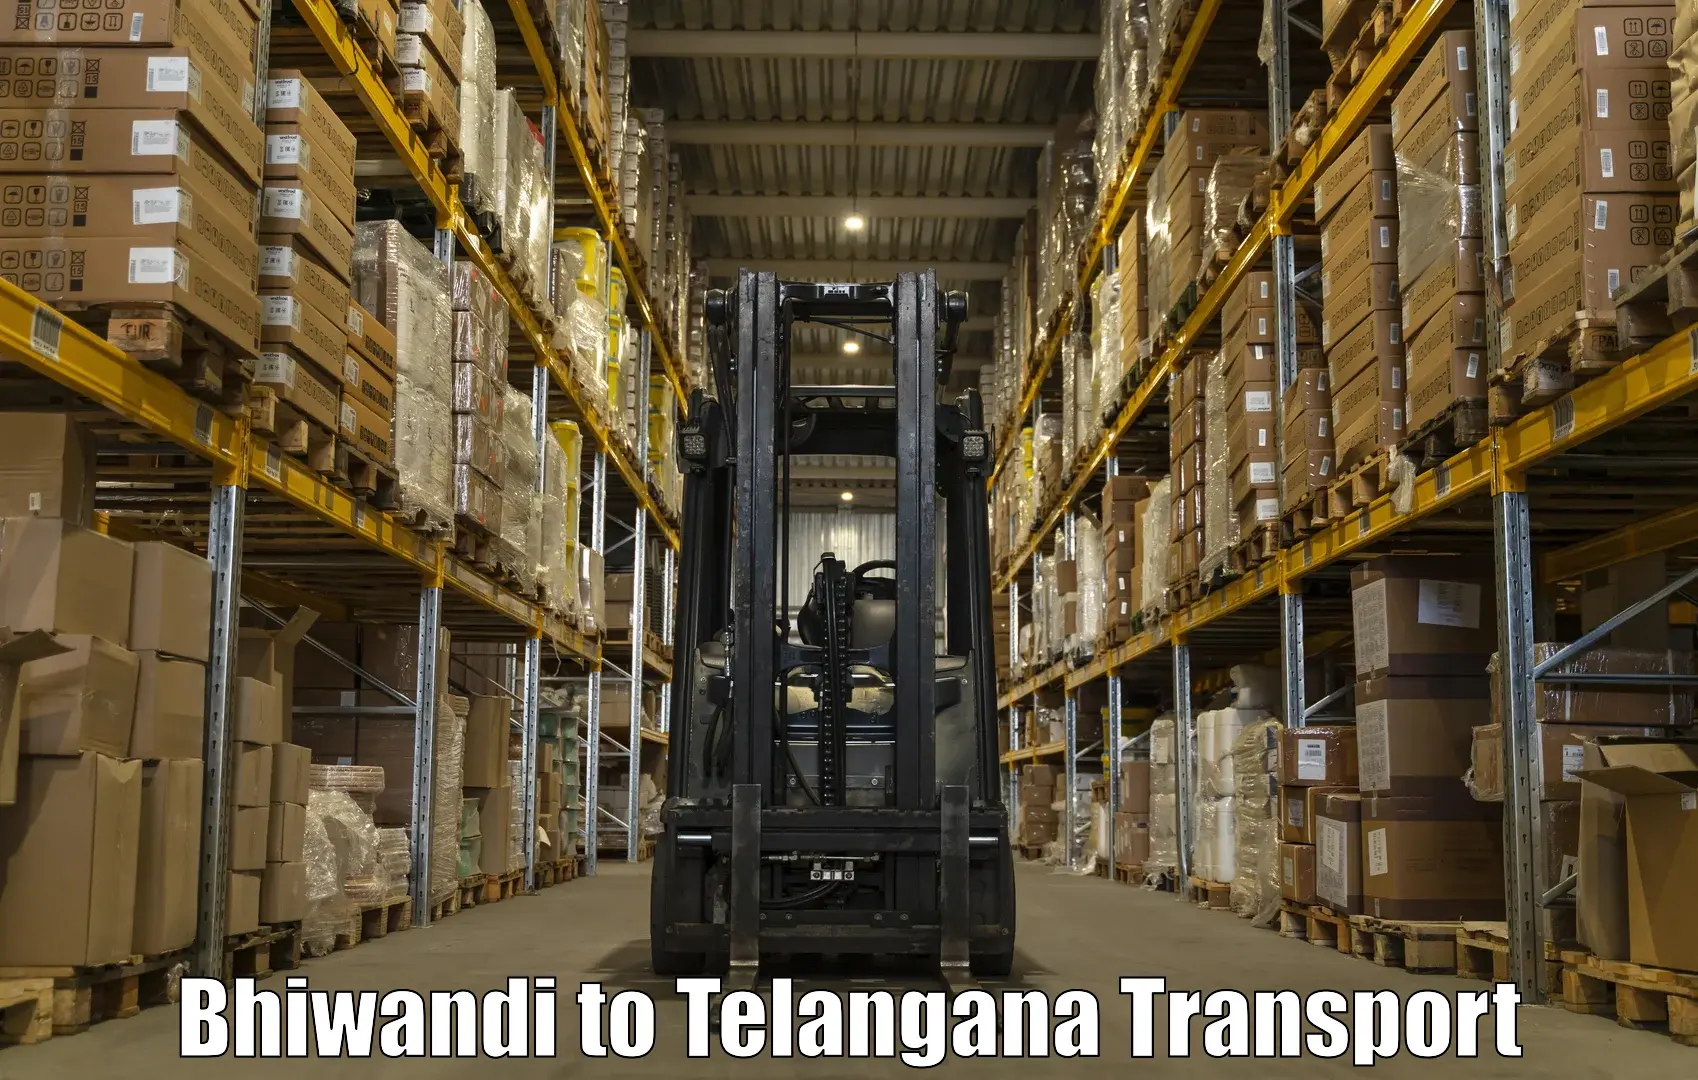 Goods delivery service Bhiwandi to Rudrangi